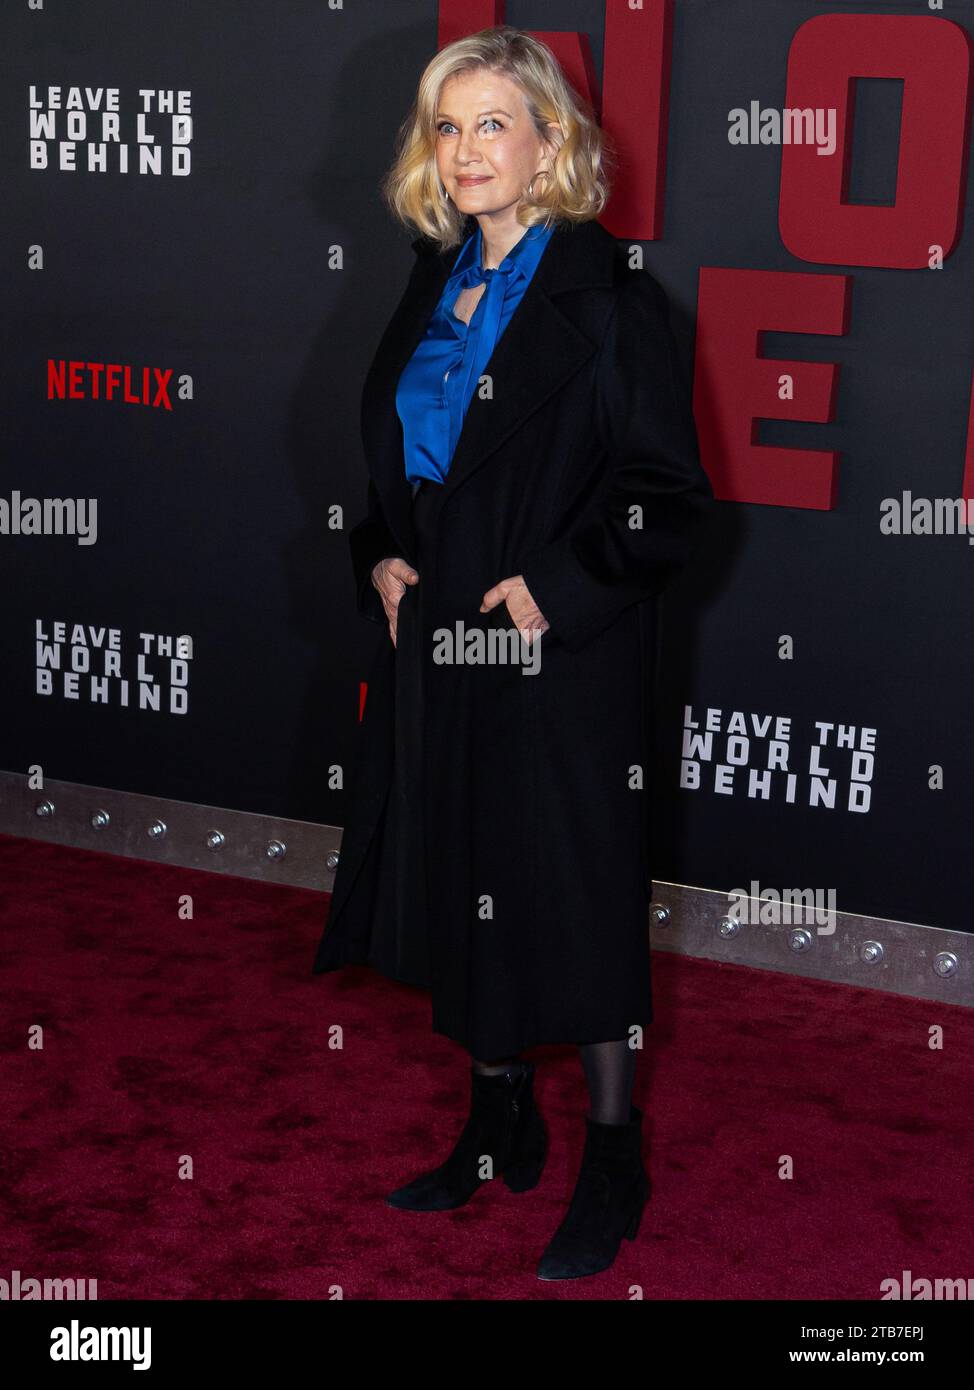 New York City, United States. 04th Dec, 2023. MANHATTAN, NEW YORK CITY, NEW YORK, USA - DECEMBER 04: American television broadcast journalist Diane Sawyer arrives at the New York Premiere Of Netflix's 'Leave The World Behind' held at The Paris Theater on December 4, 2023 in Manhattan, New York City, New York, United States. (Photo by Christian Lora/Image Press Agency) Credit: Image Press Agency/Alamy Live News Stock Photo